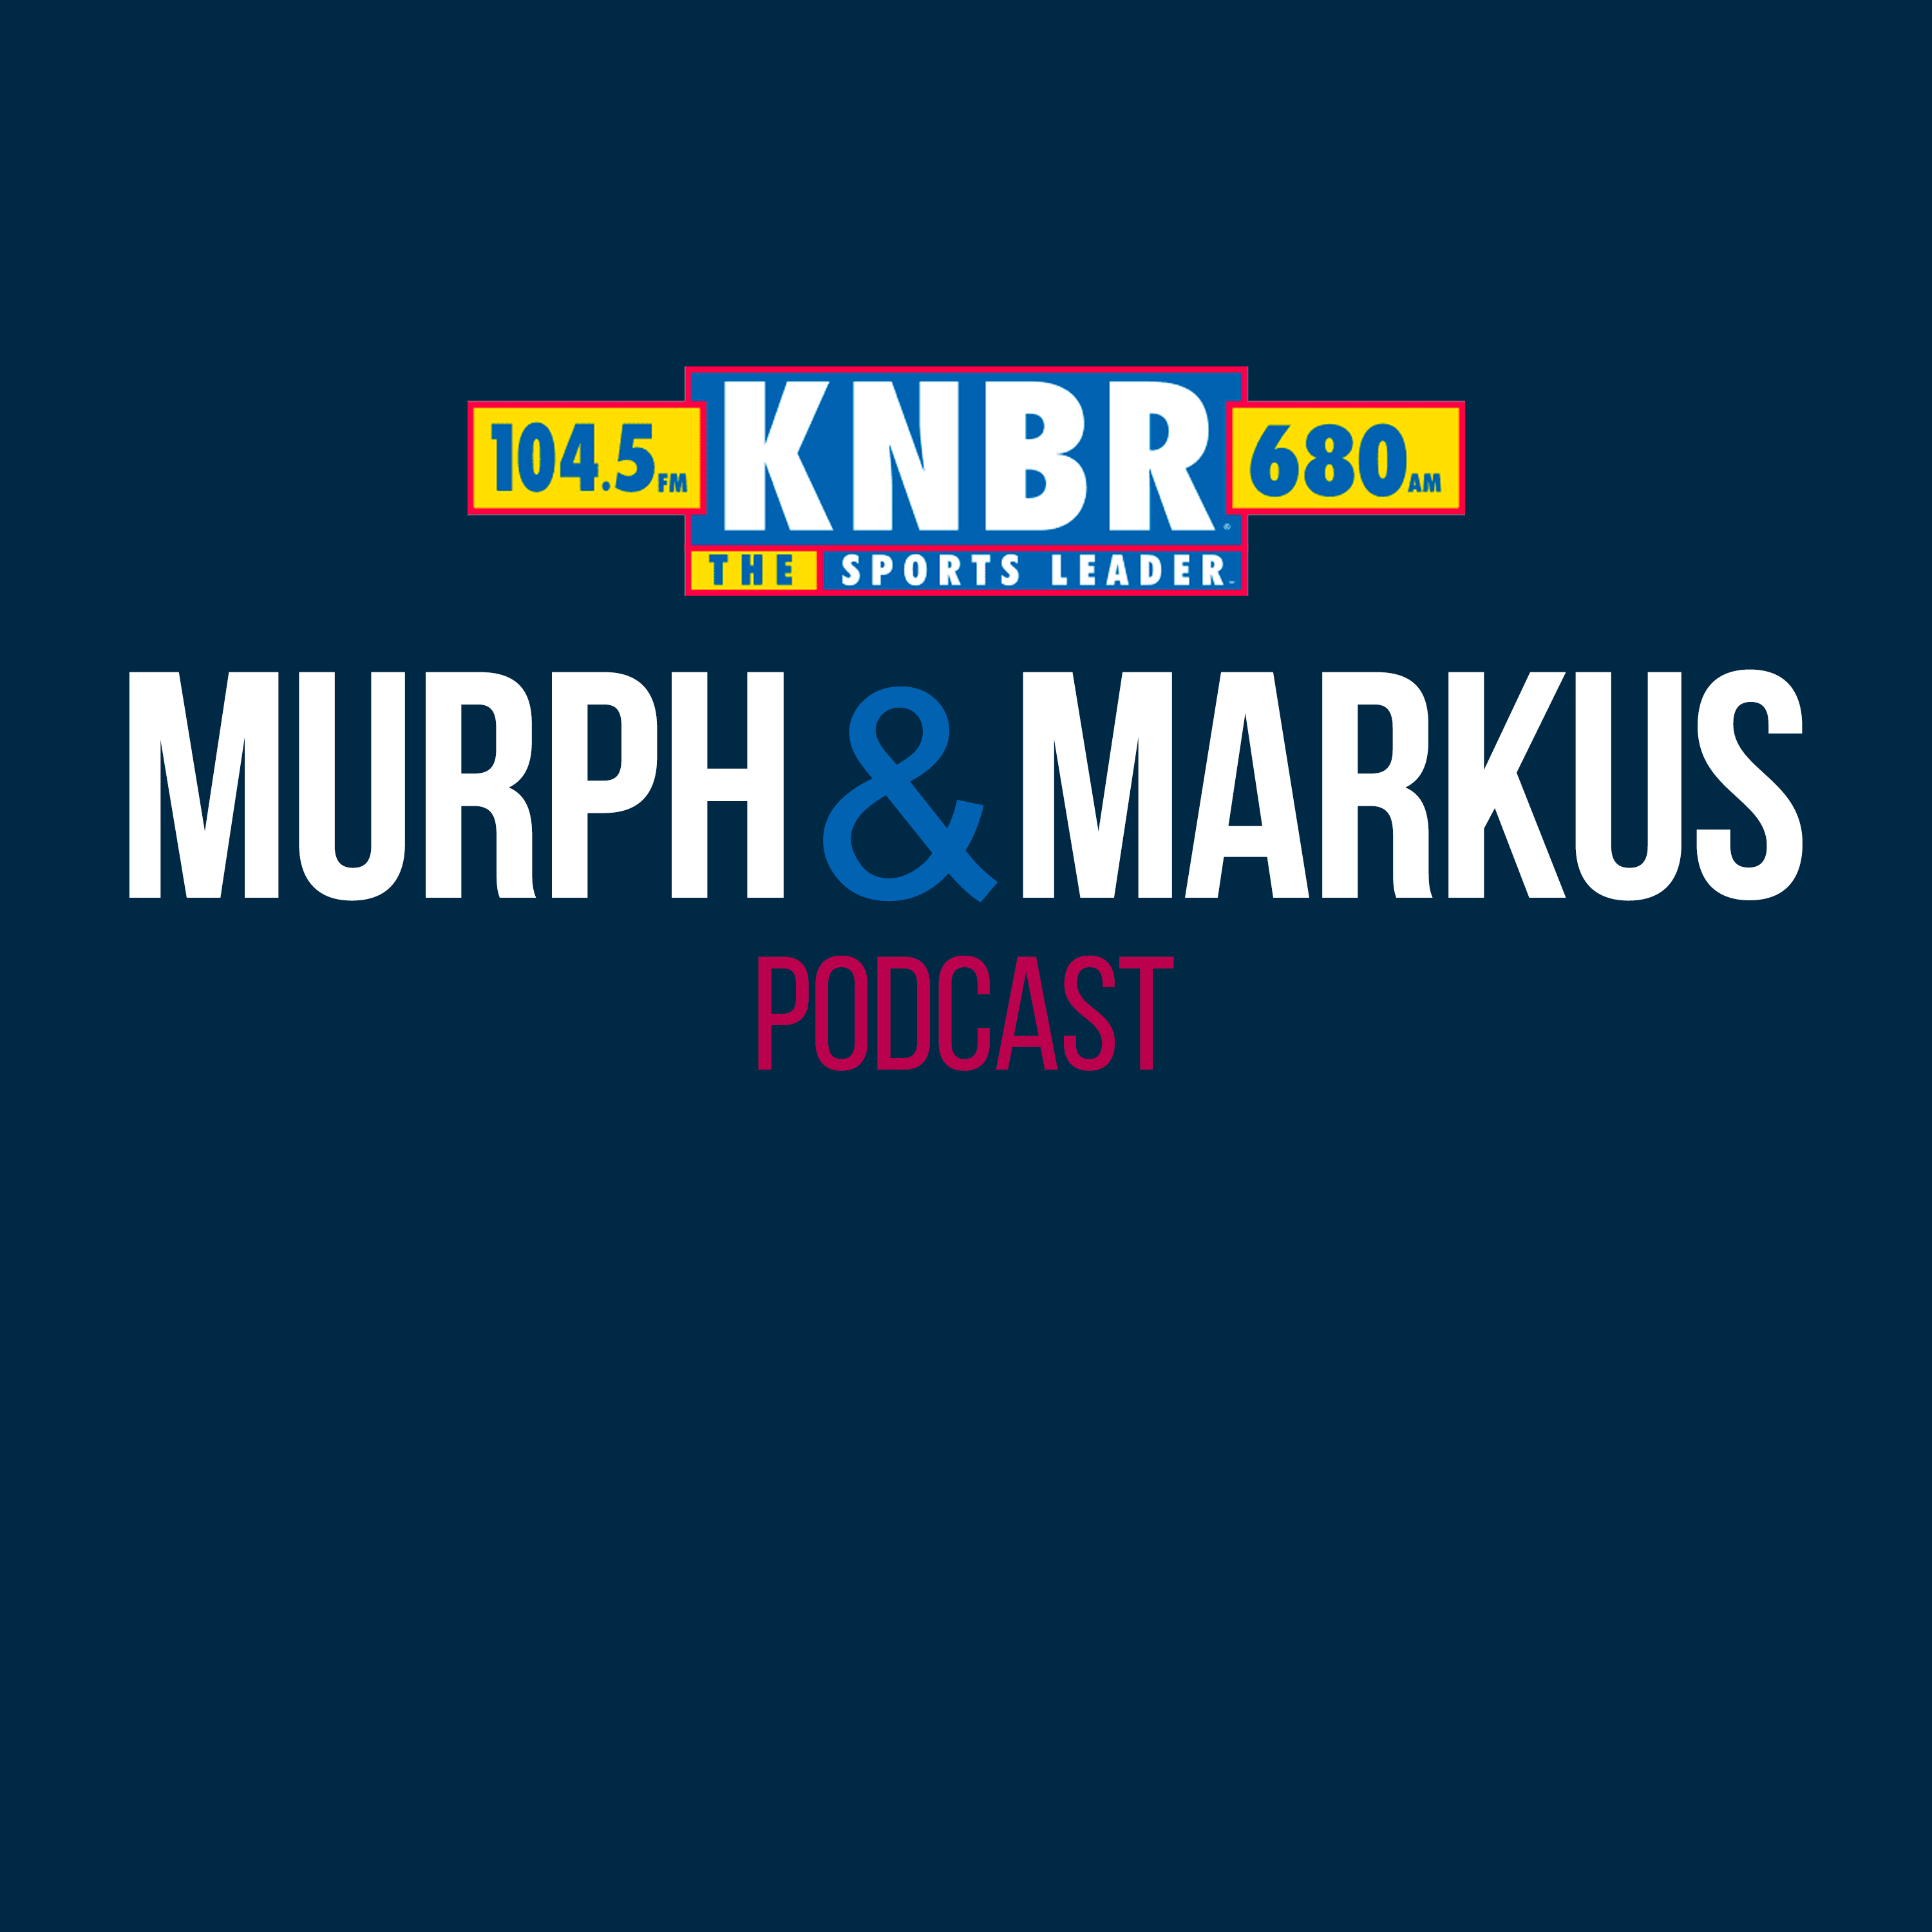 7-30 Deommodore Lenoir joins Murph 7 Markus to talk about his relationship with Nick Sorenson dating back to last season, and the 49ers offensive playmakers who sharpen his skills at training camp